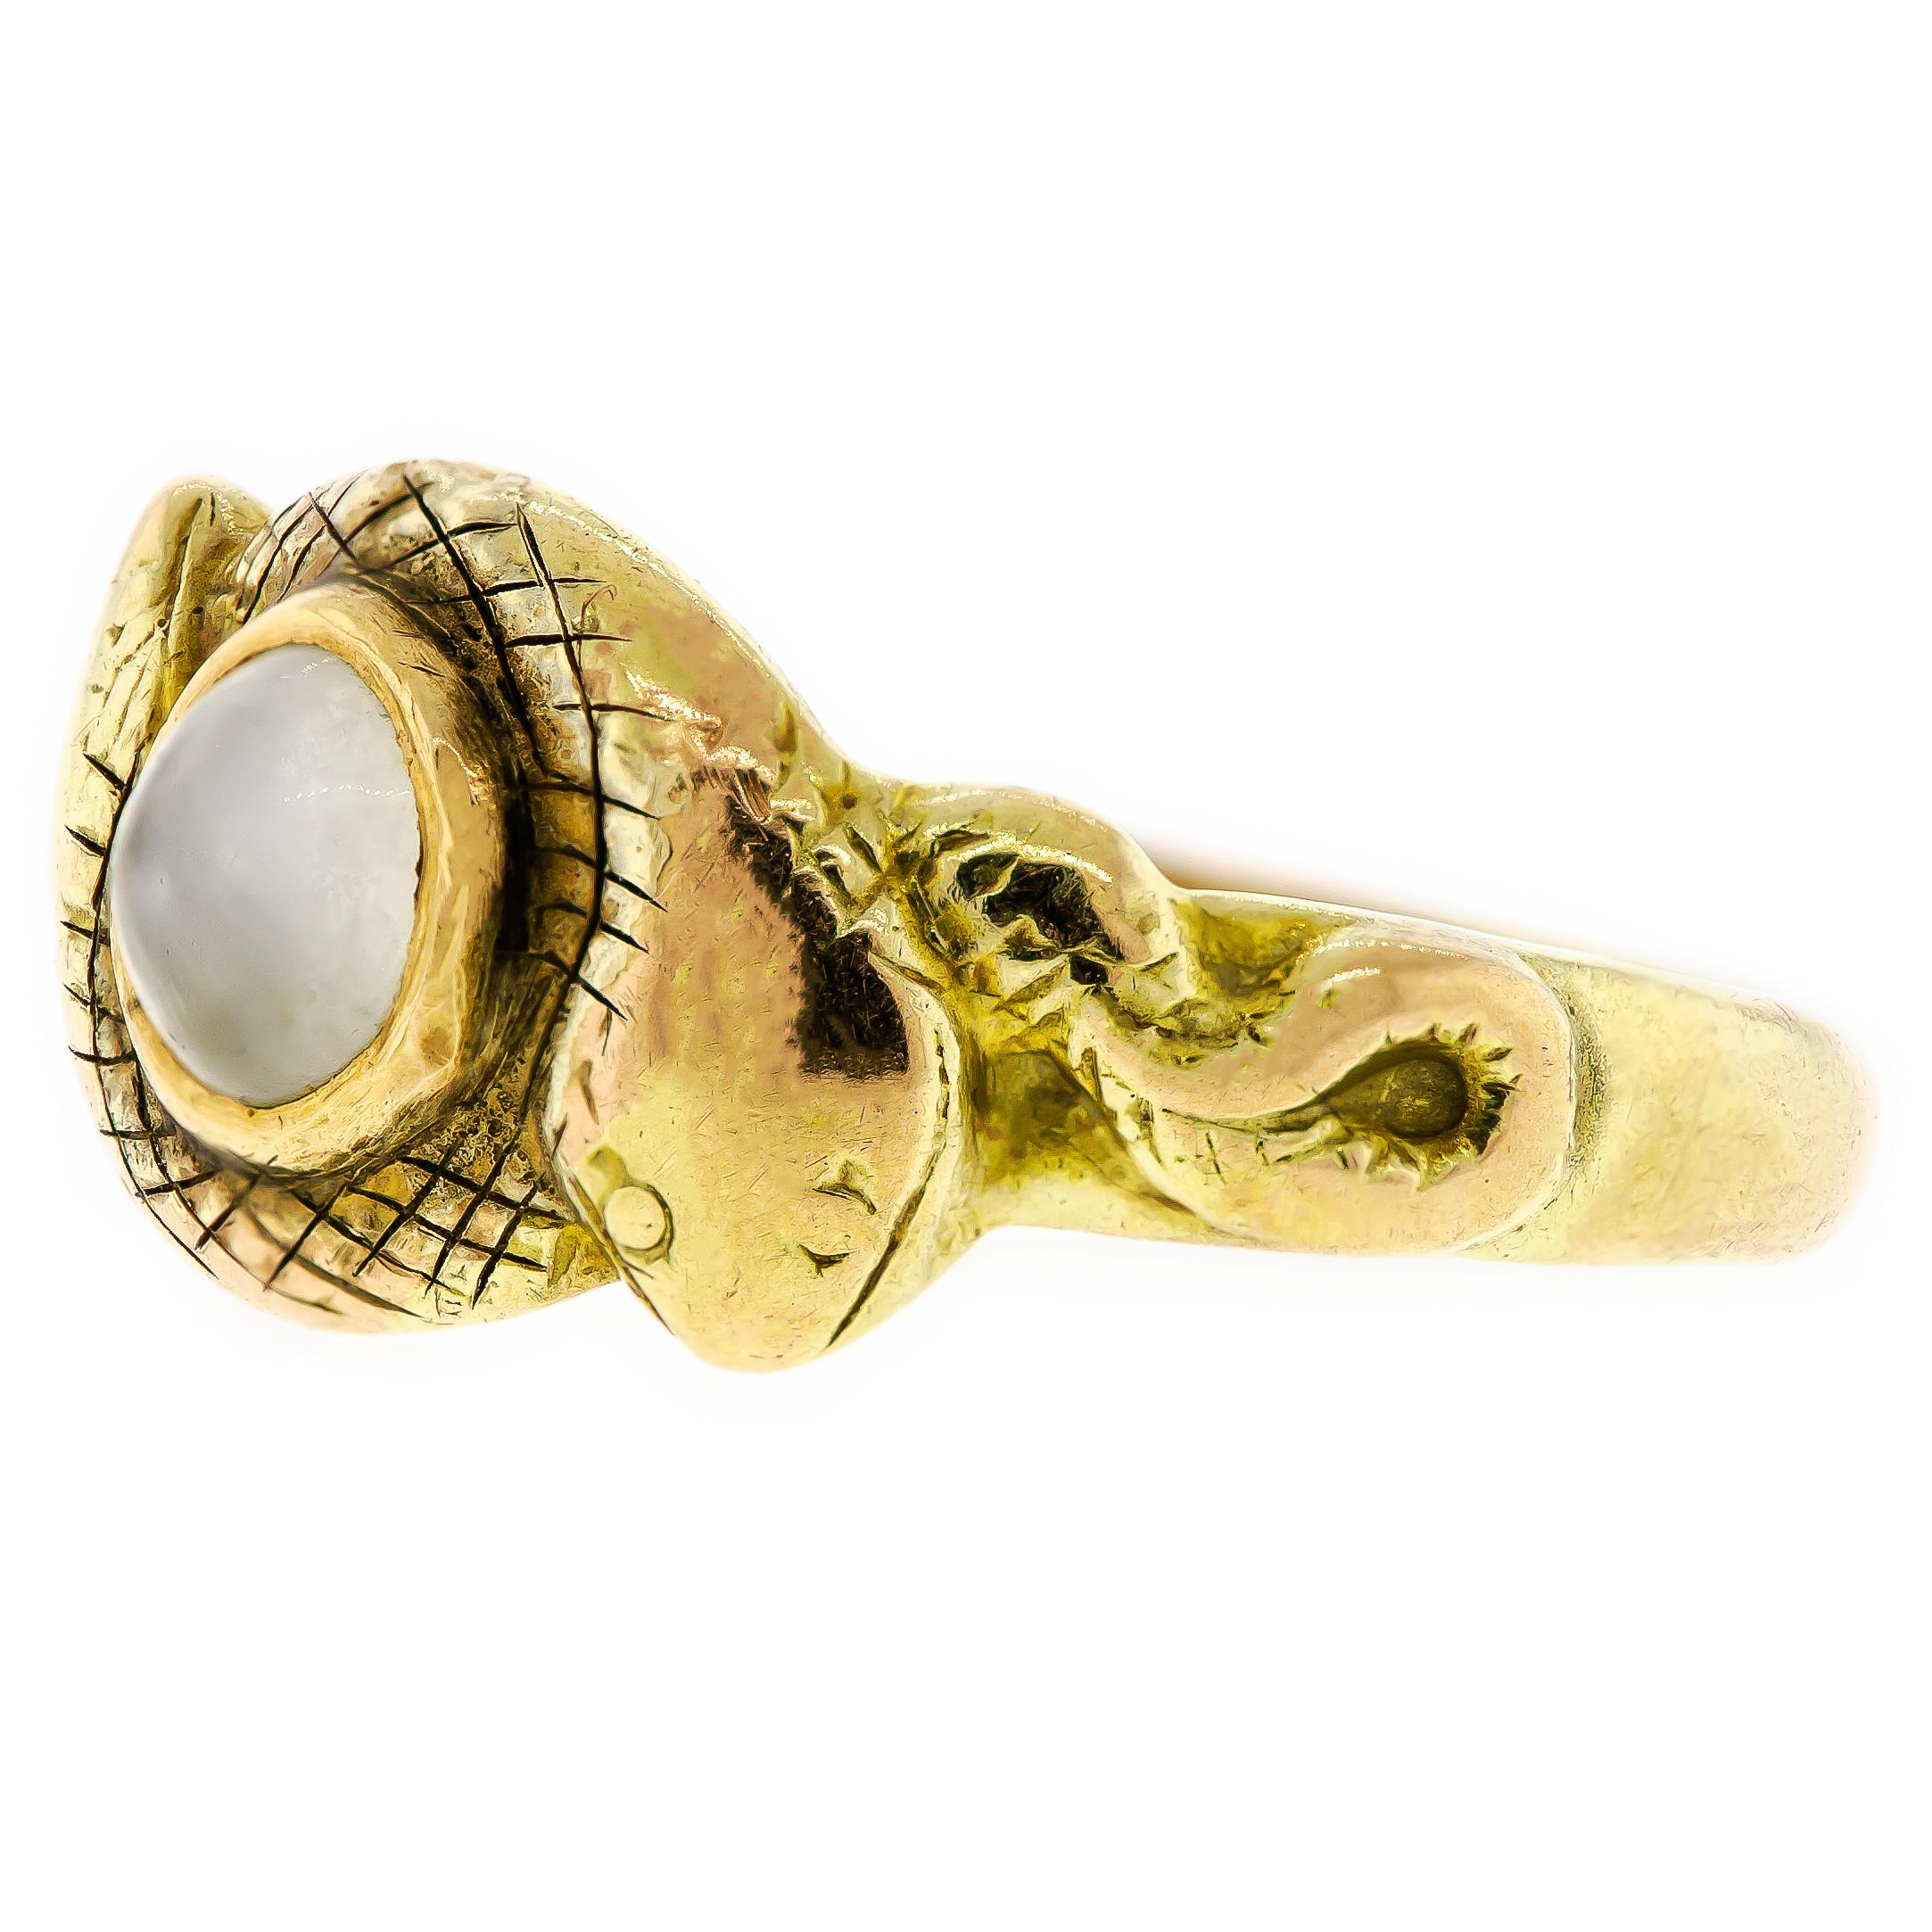 Rare antique moonstone double snake 14 karat yellow gold ring - centrally bezel set with one round moonstone - accented on the sides with two snakes coiled around each other - rendered in 14k yellow gold - currently about a size 7 3/4 but can be